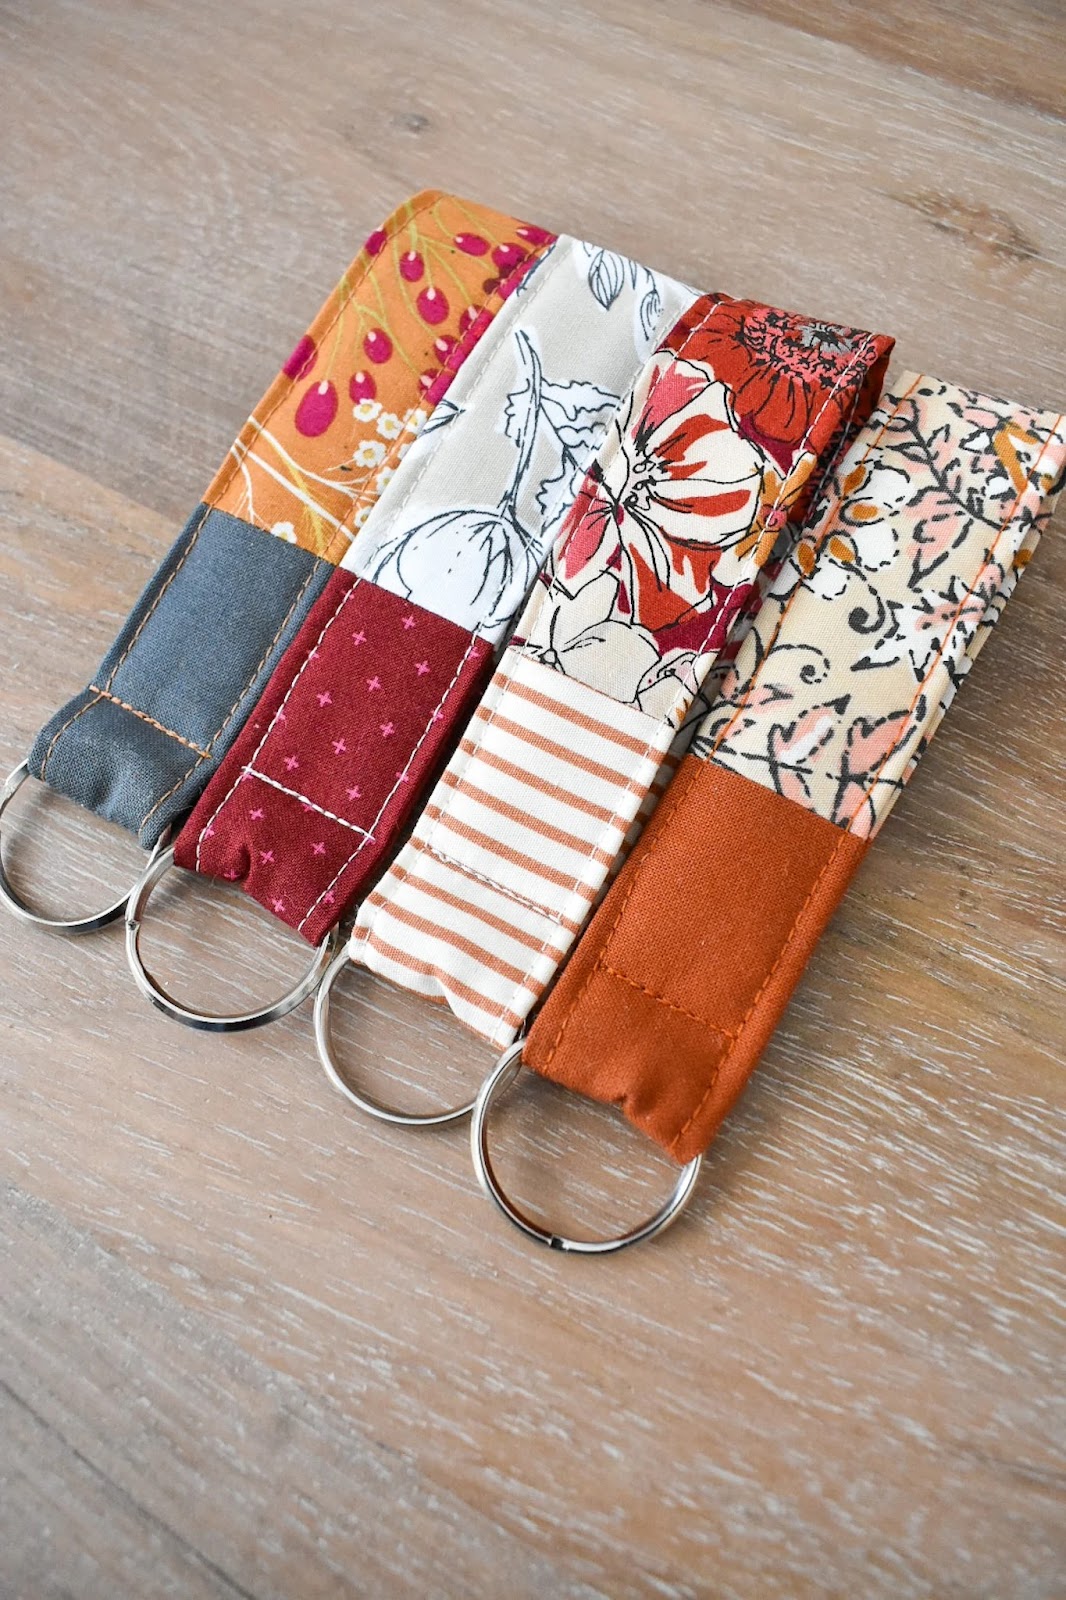 scrappy key fob Easy sewing projects for gifts